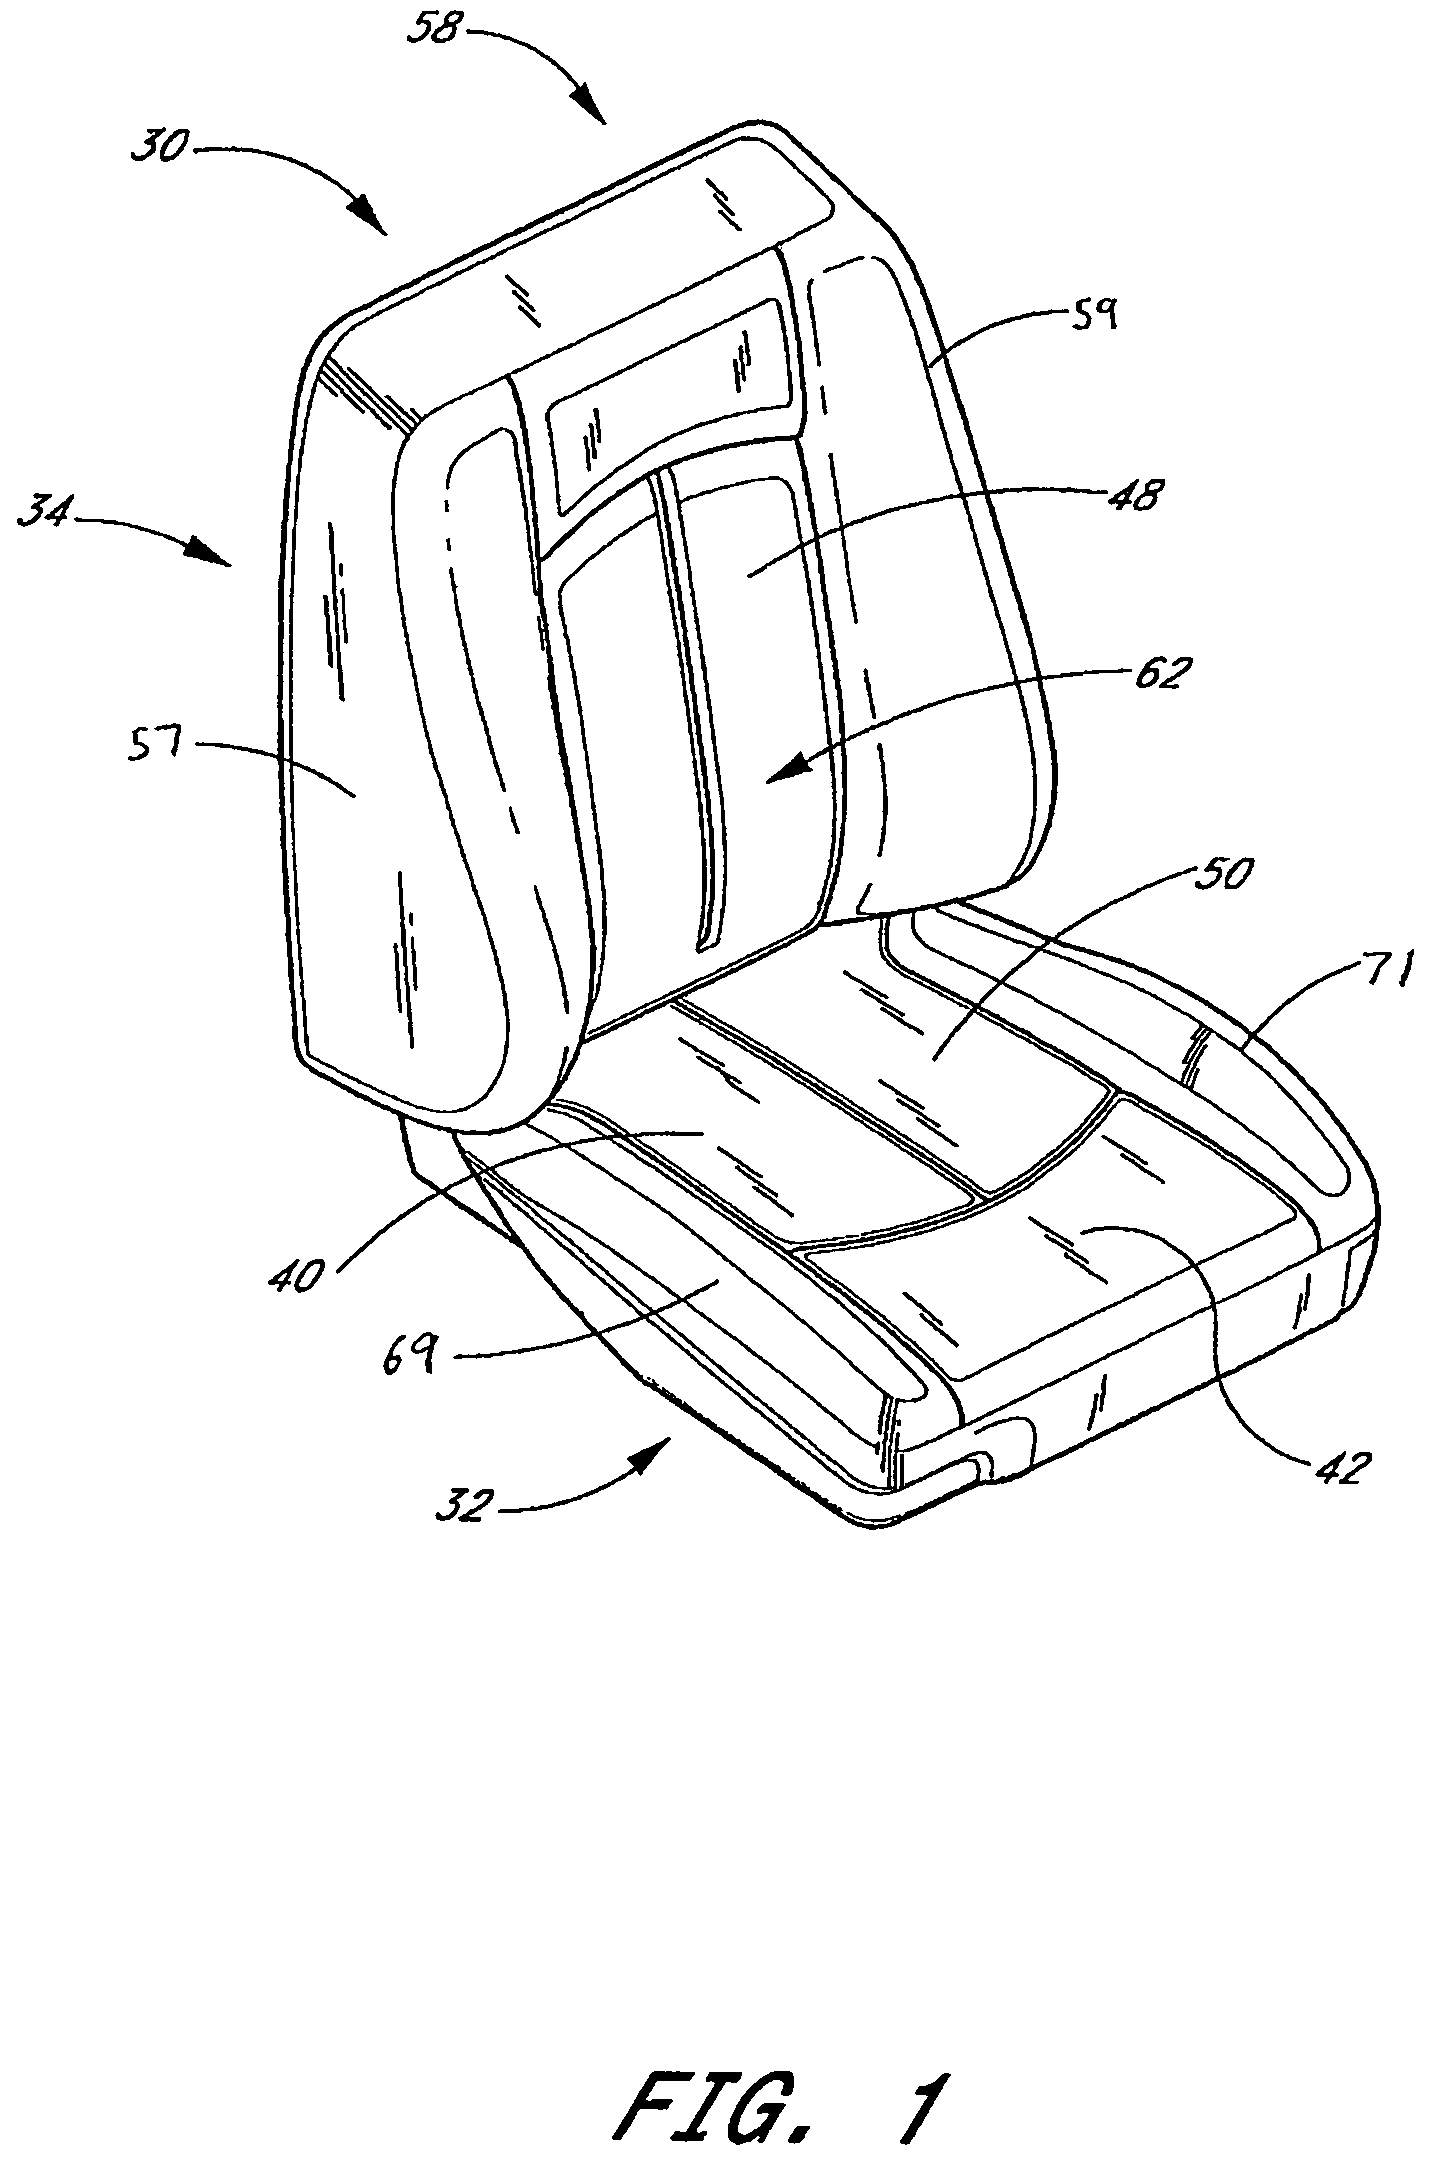 Control system for thermal module in vehicle